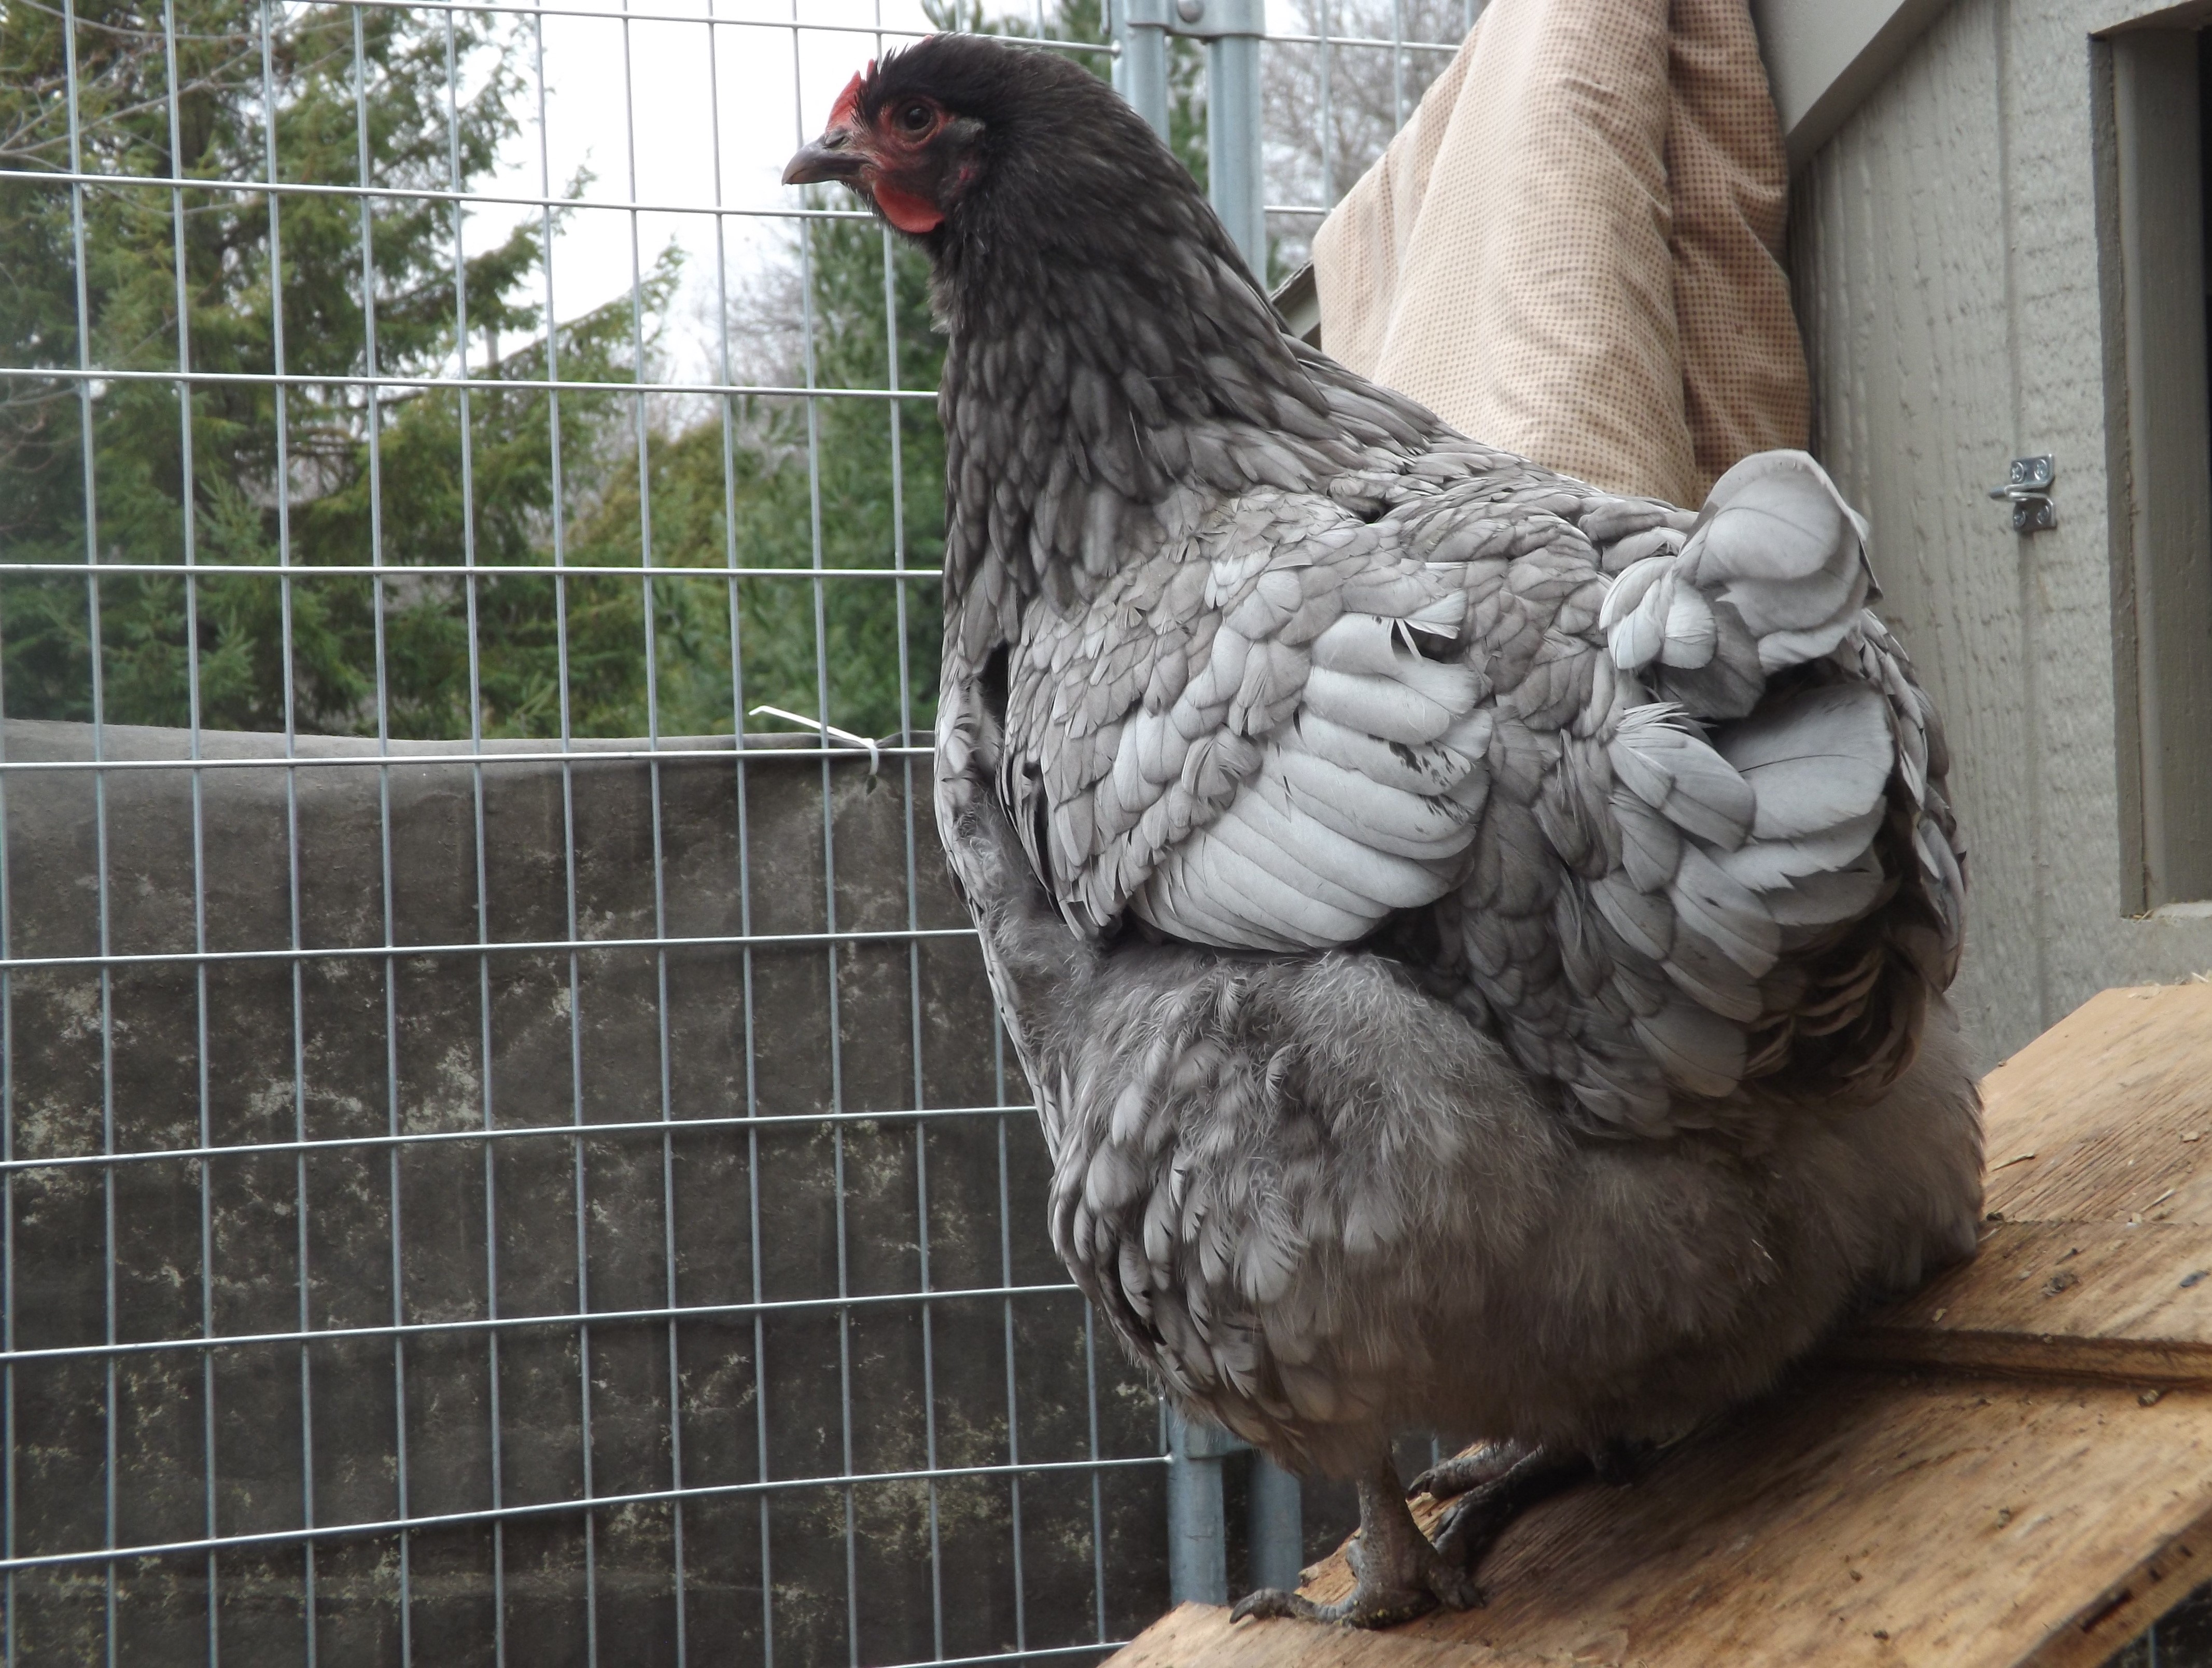 This is our first show quality bbs hen in our breeding program.